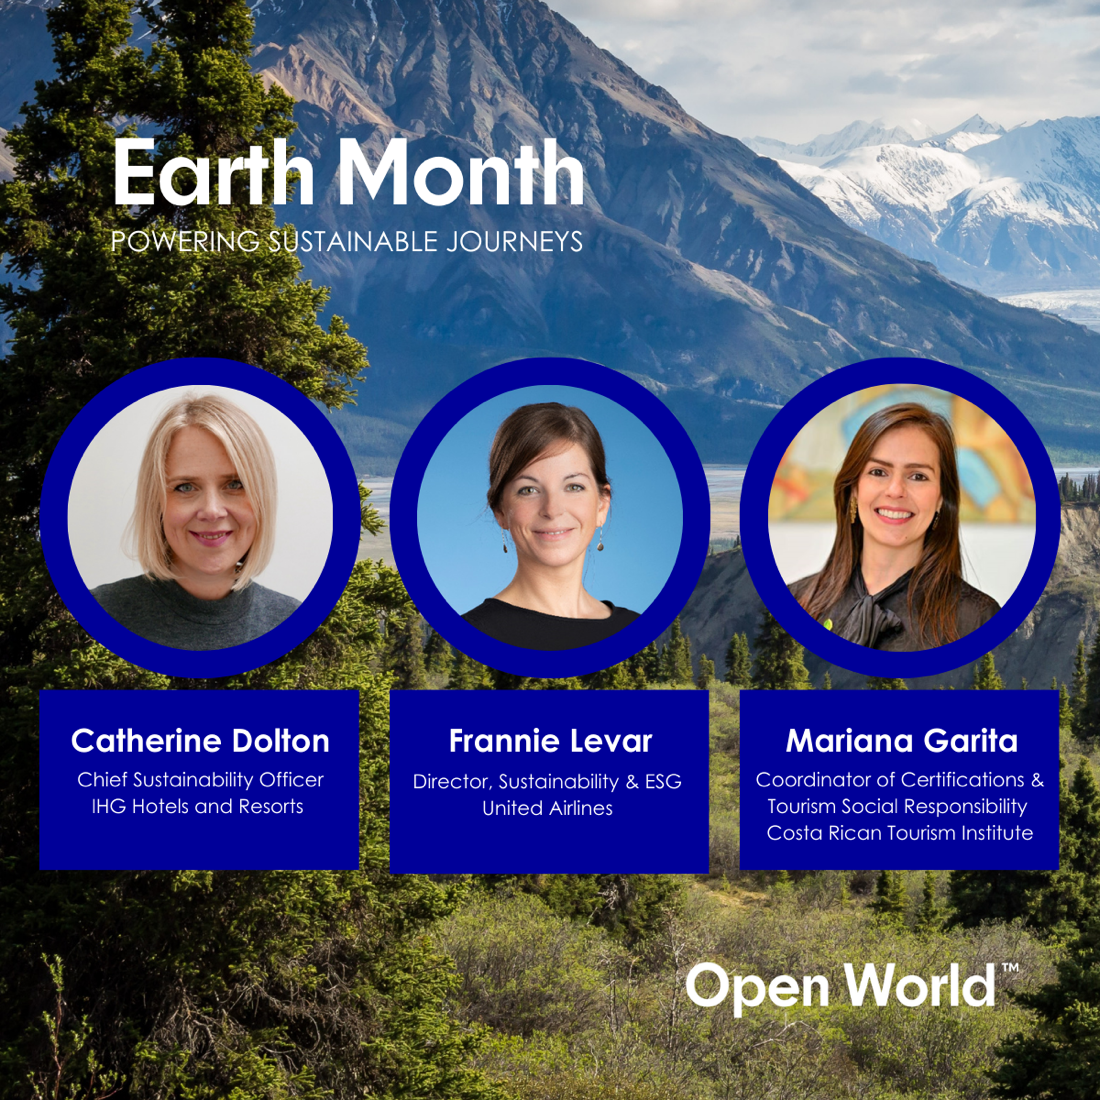 "Earth Month powering sustainable journeys" 